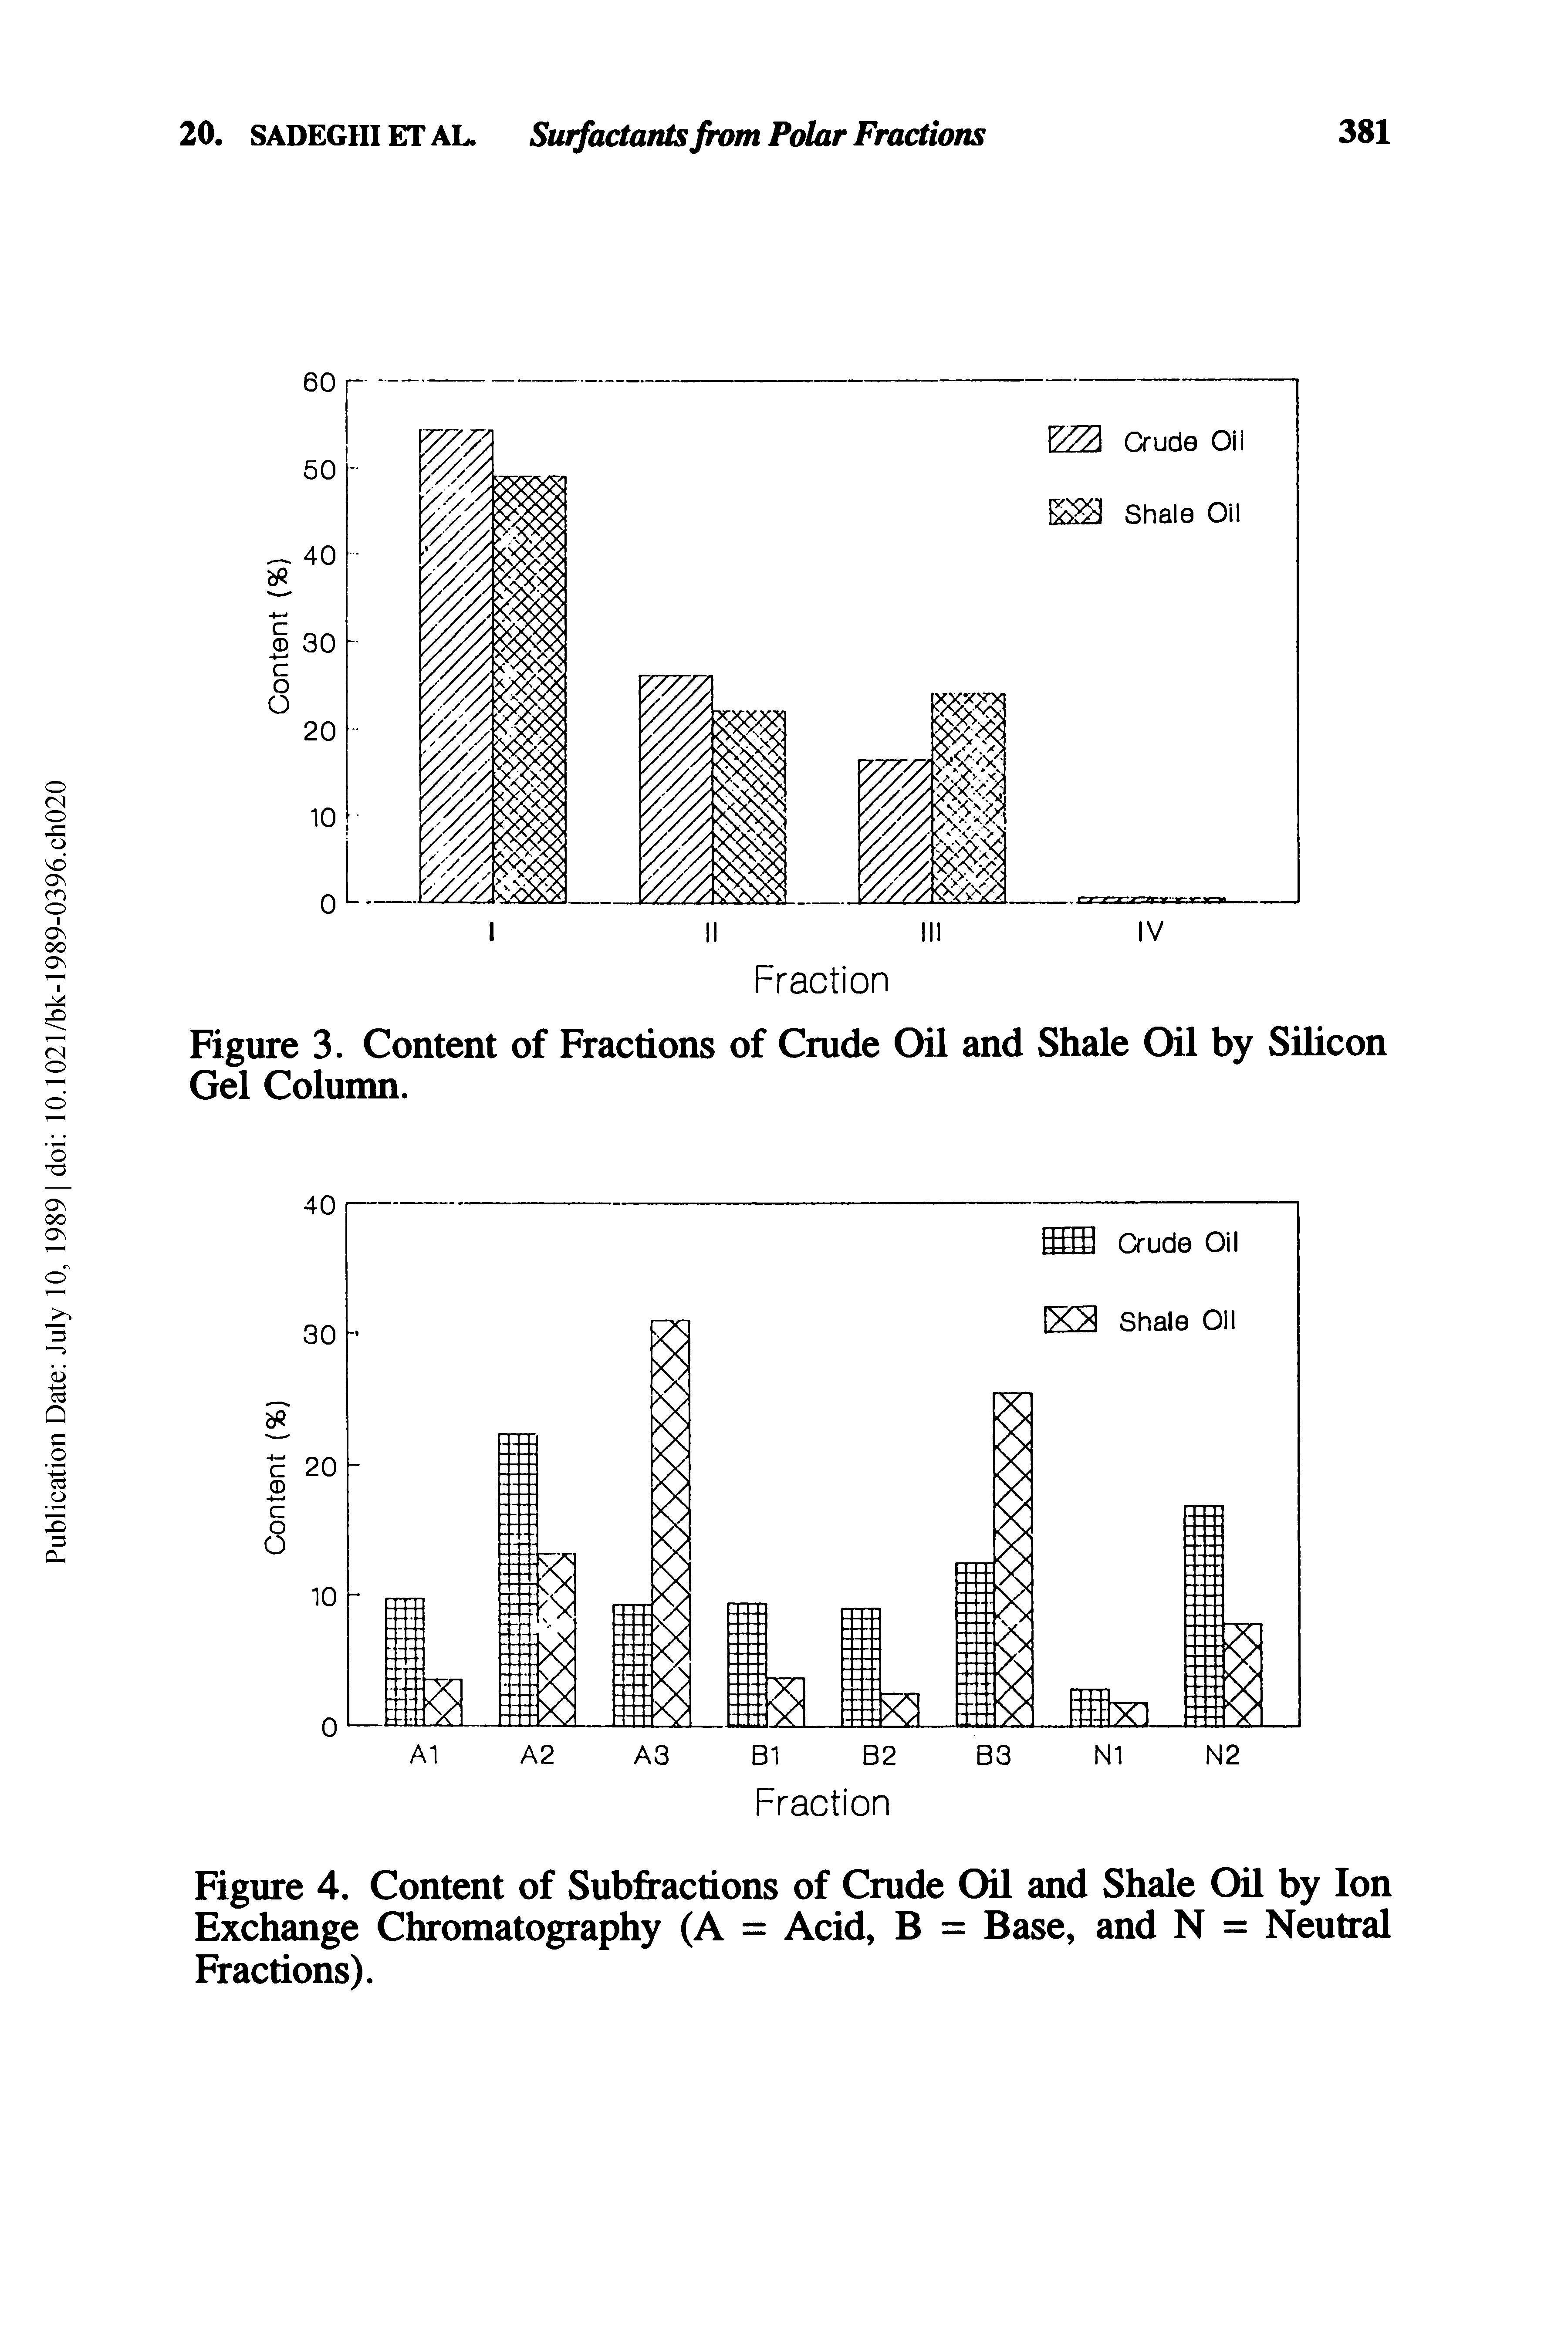 Figure 4. Content of Subfractions of Crude Oil and Shale Oil by Ion Exchange Chromatography (A = Acid, B = Base, and N = Neutral Fractions).